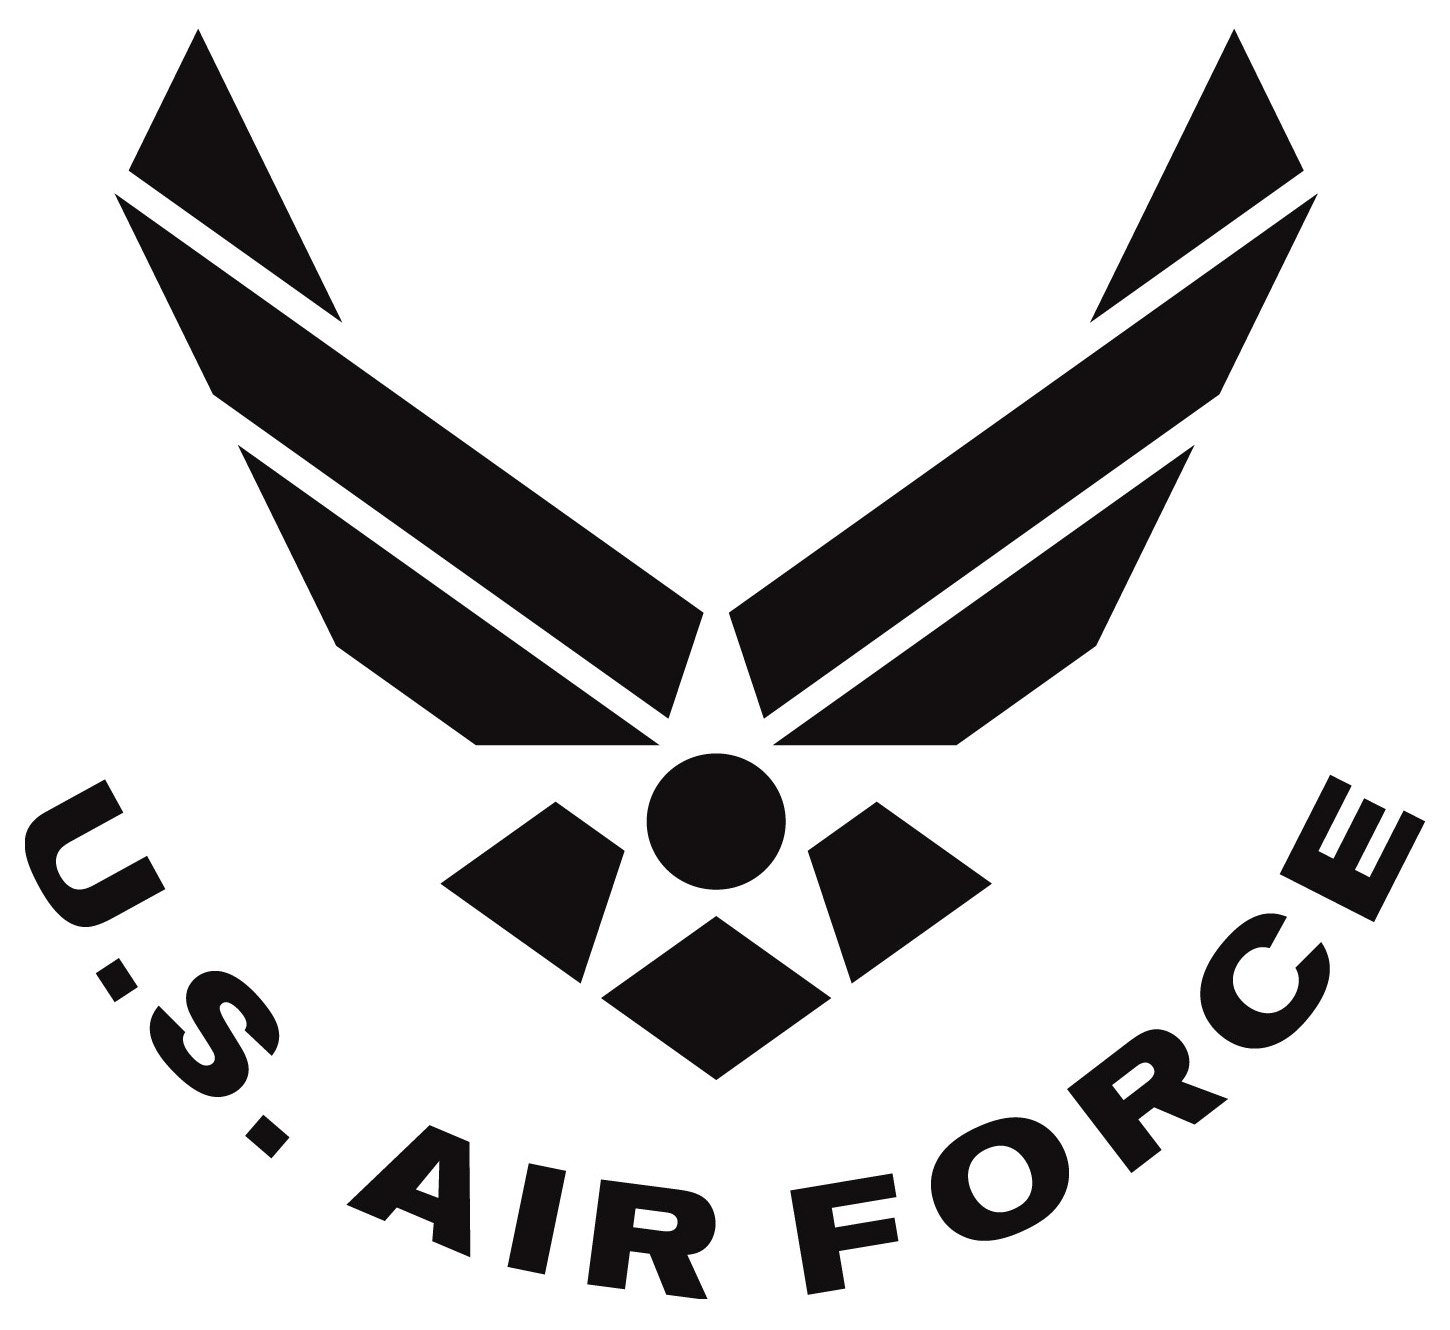 Air Force symbol, curved text, black